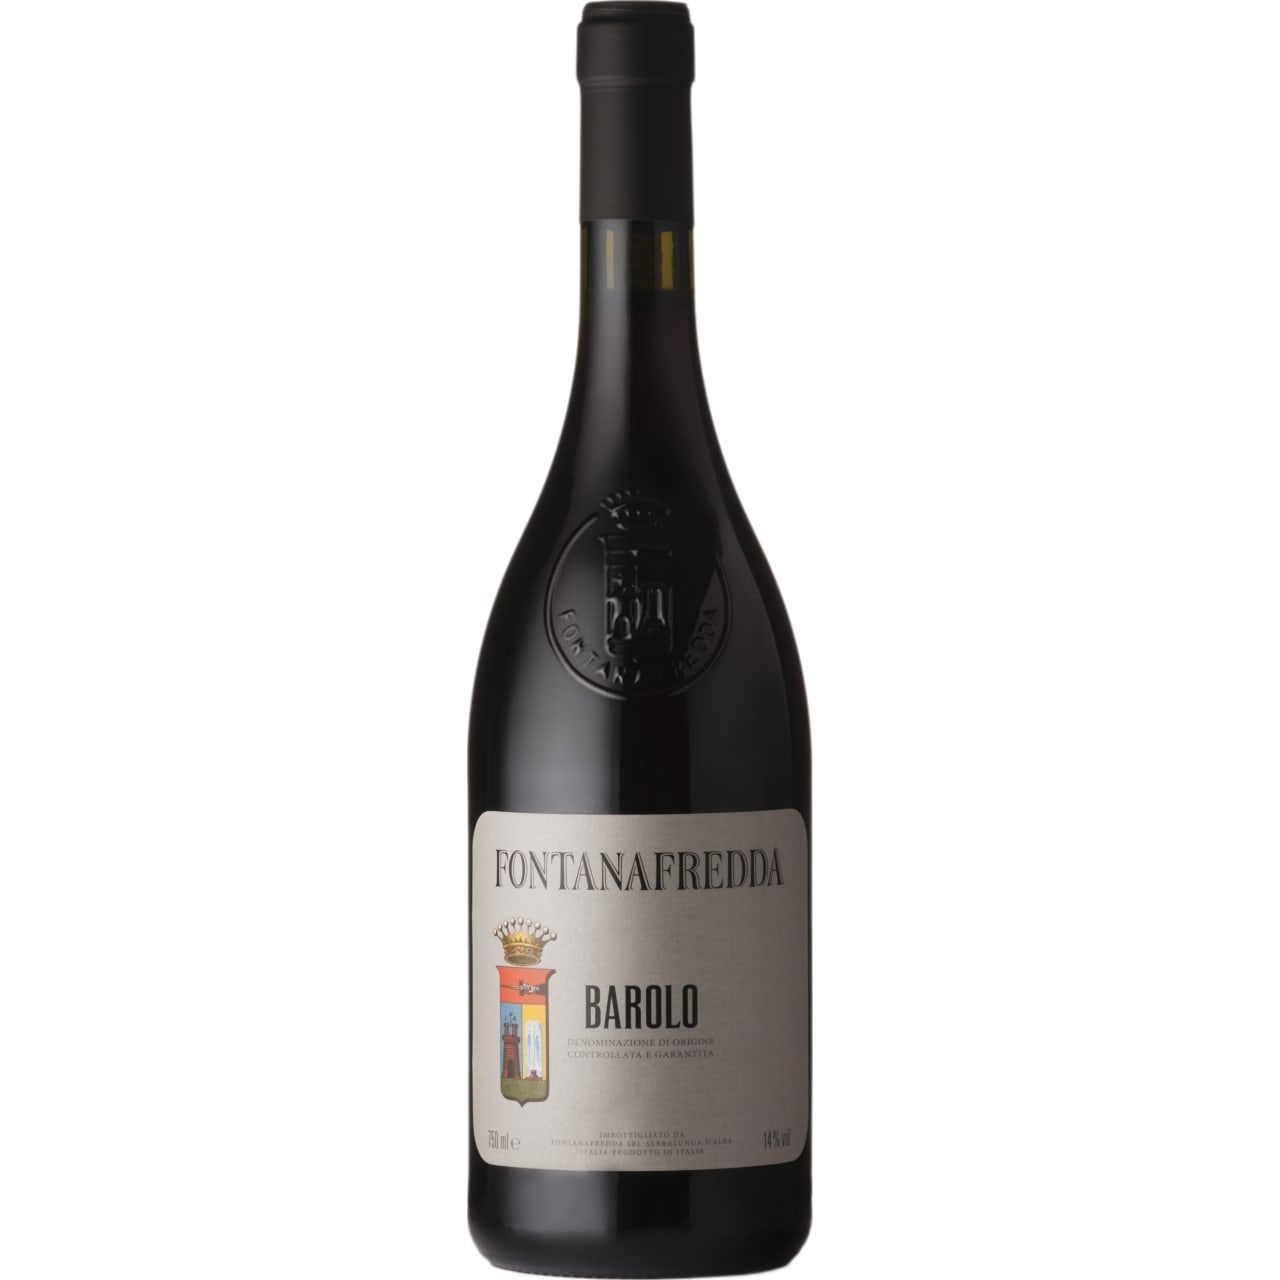 A classically styled Barolo with masses of power and concentration.